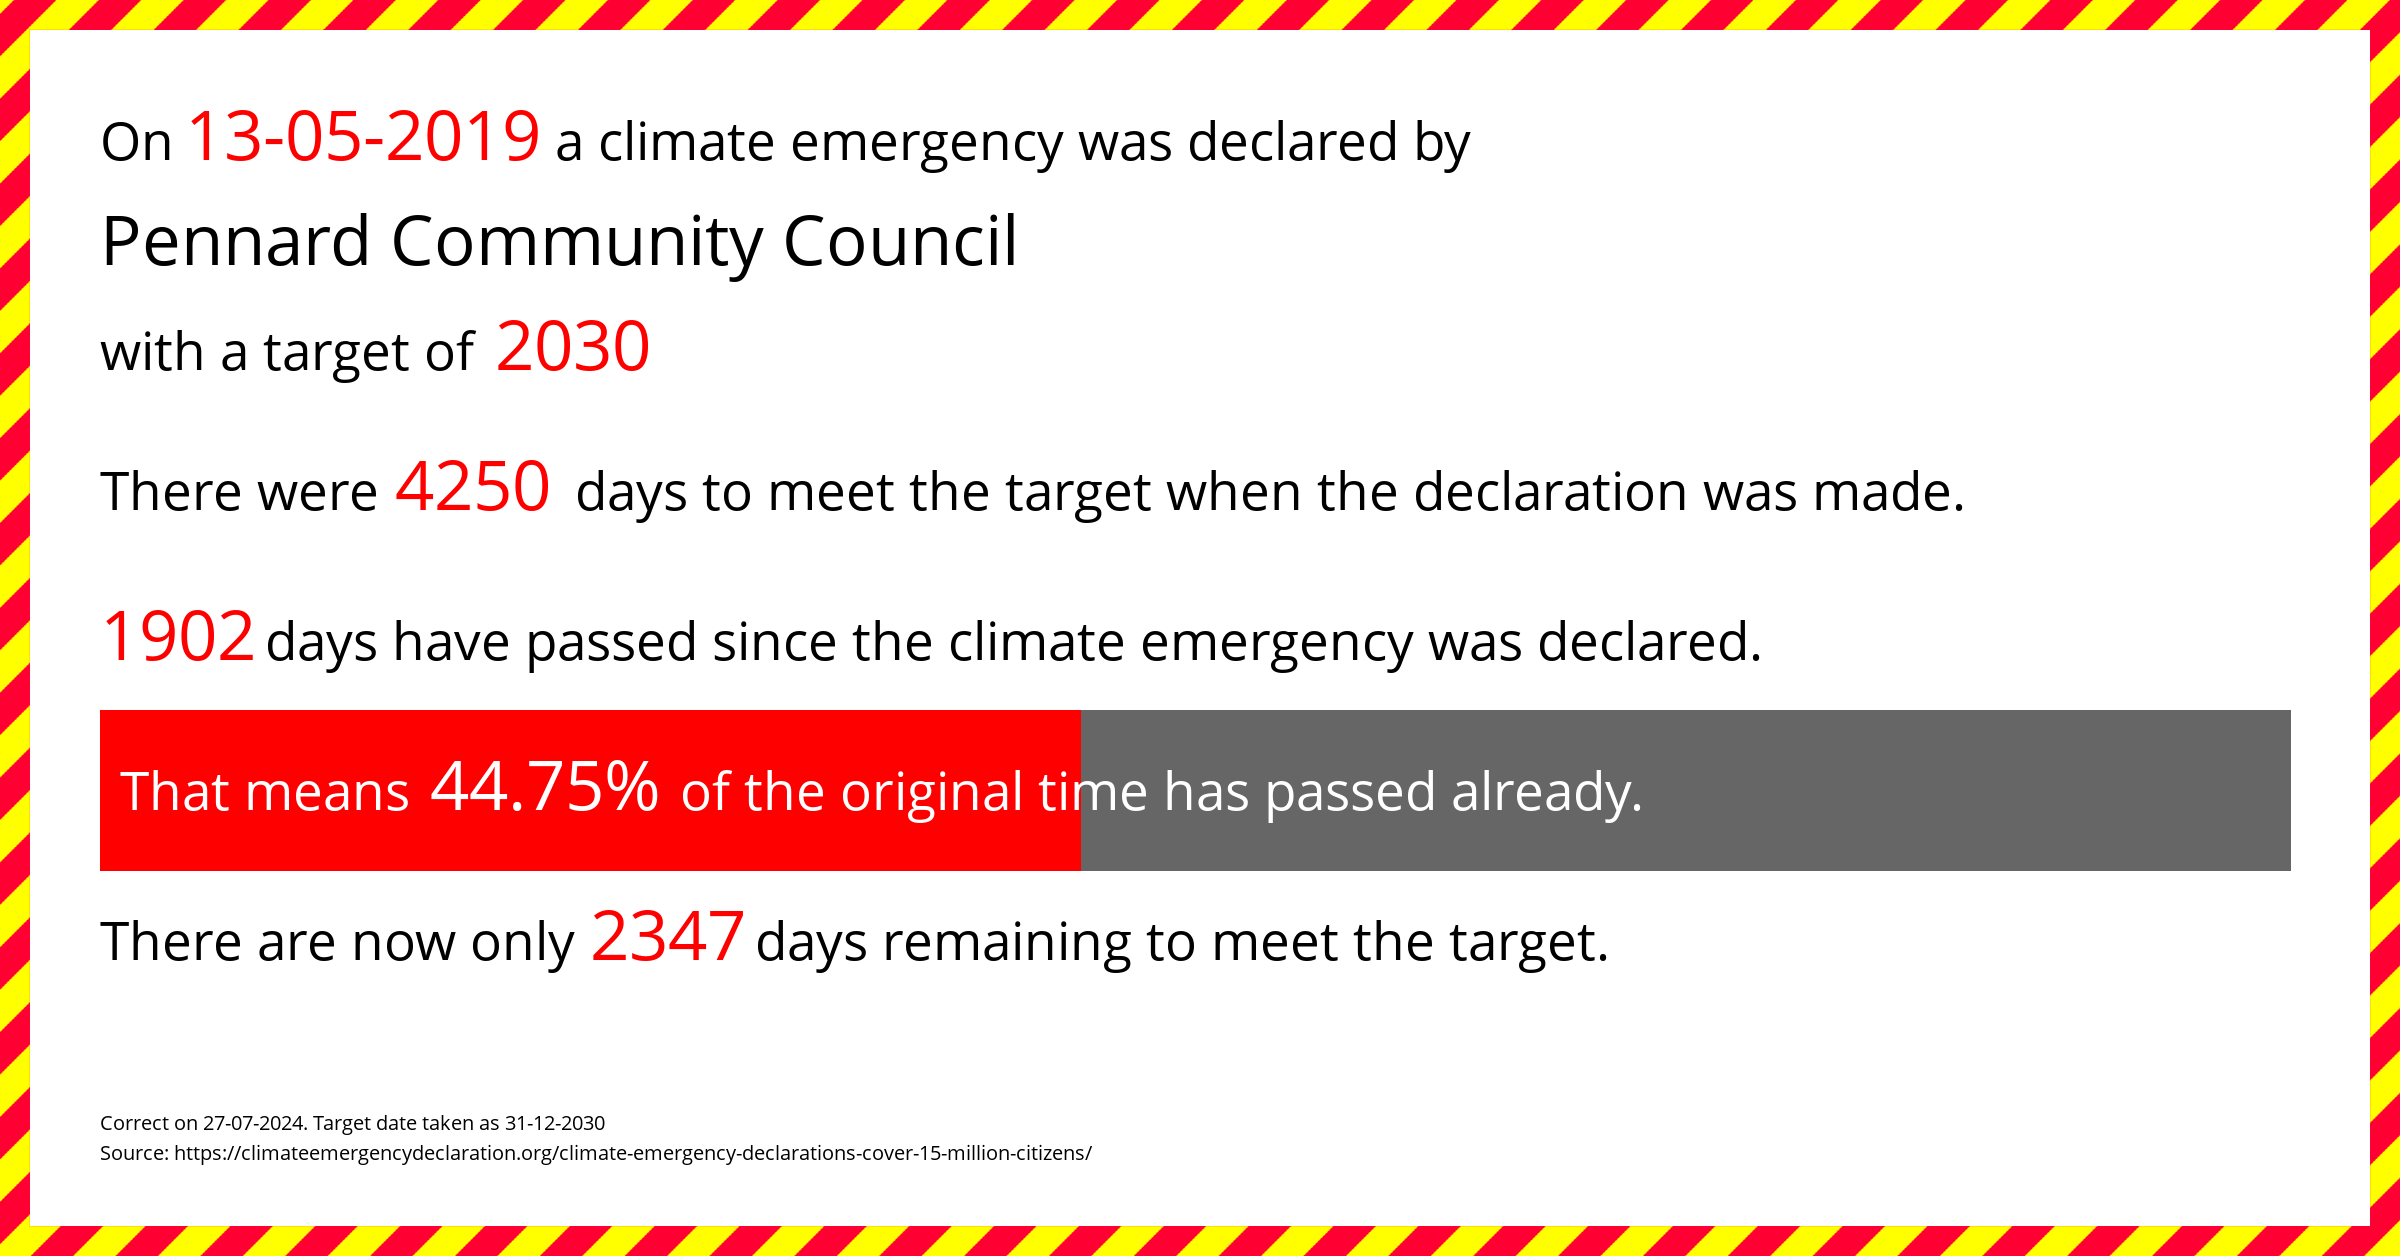 Pennard Community Council declared a Climate emergency on Monday 13th May 2019, with a target of 2030.